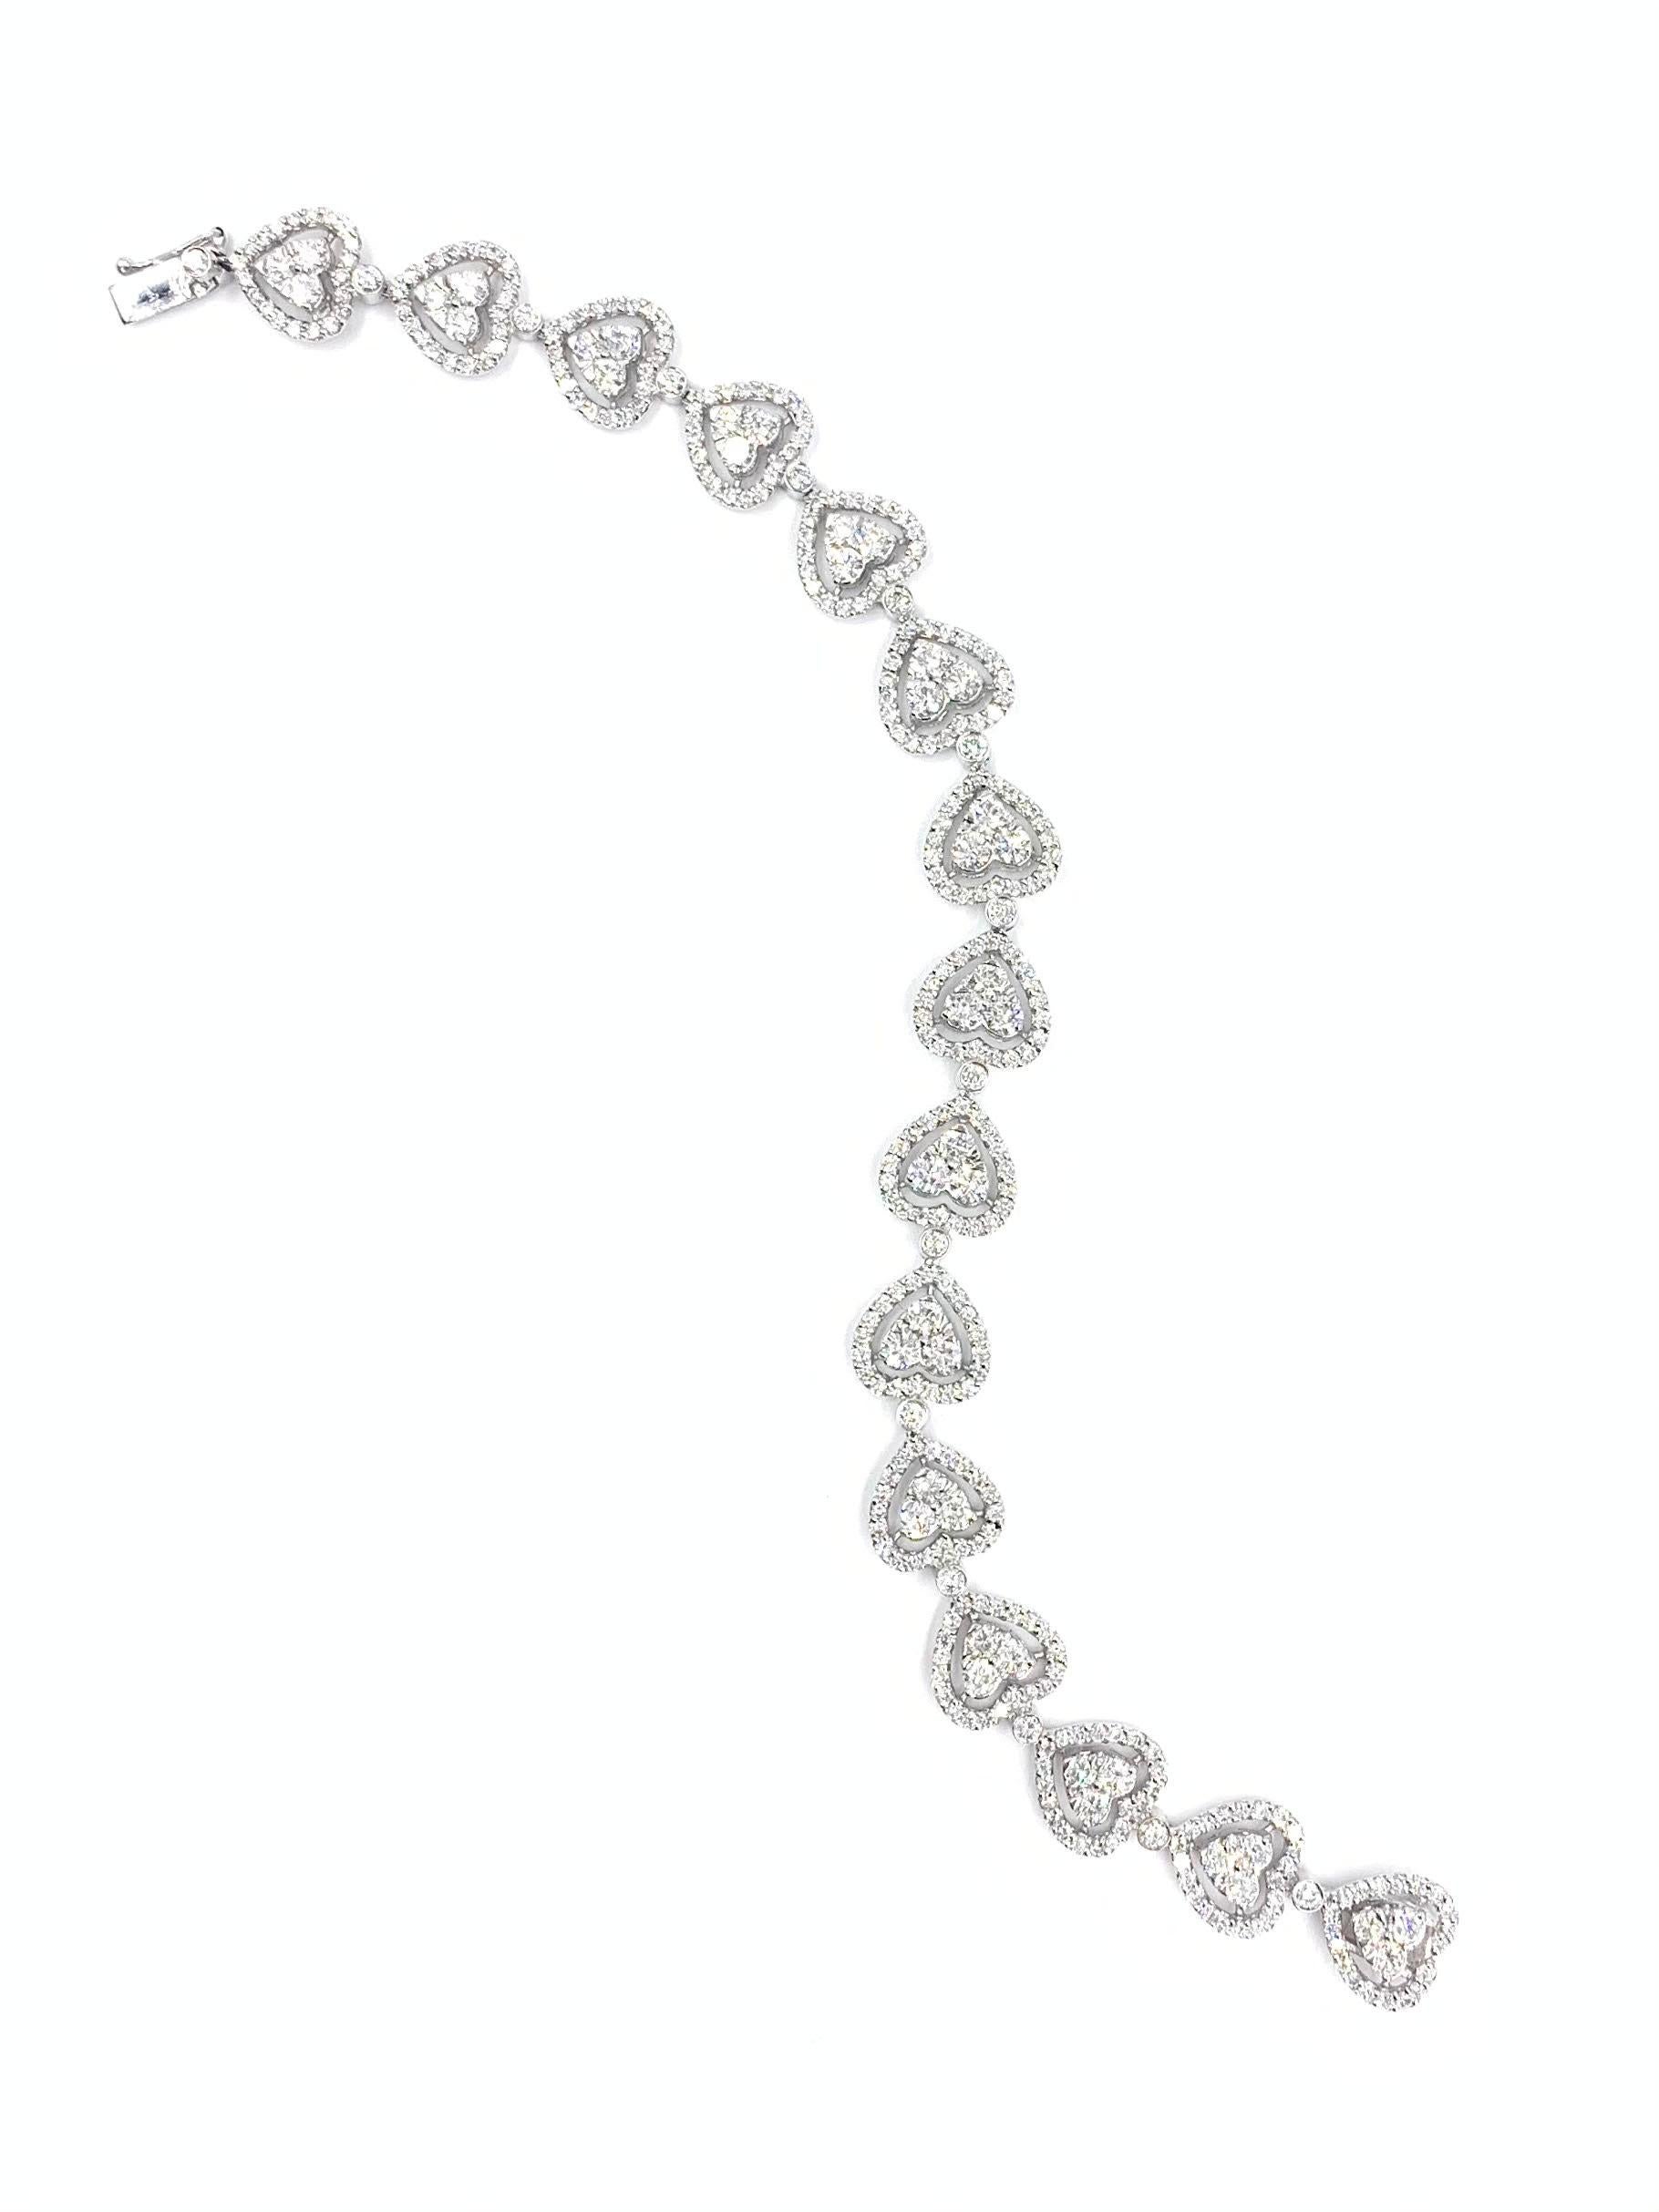 Made with superior craftsmanship by Gregg Ruth. This sparkling 18k white gold bracelet is adorned with 360 round brilliant diamonds at 6.18 carats total weight. Diamond quality is approximately F-G color, VS1-VS2 clarity. Fastens securely closed